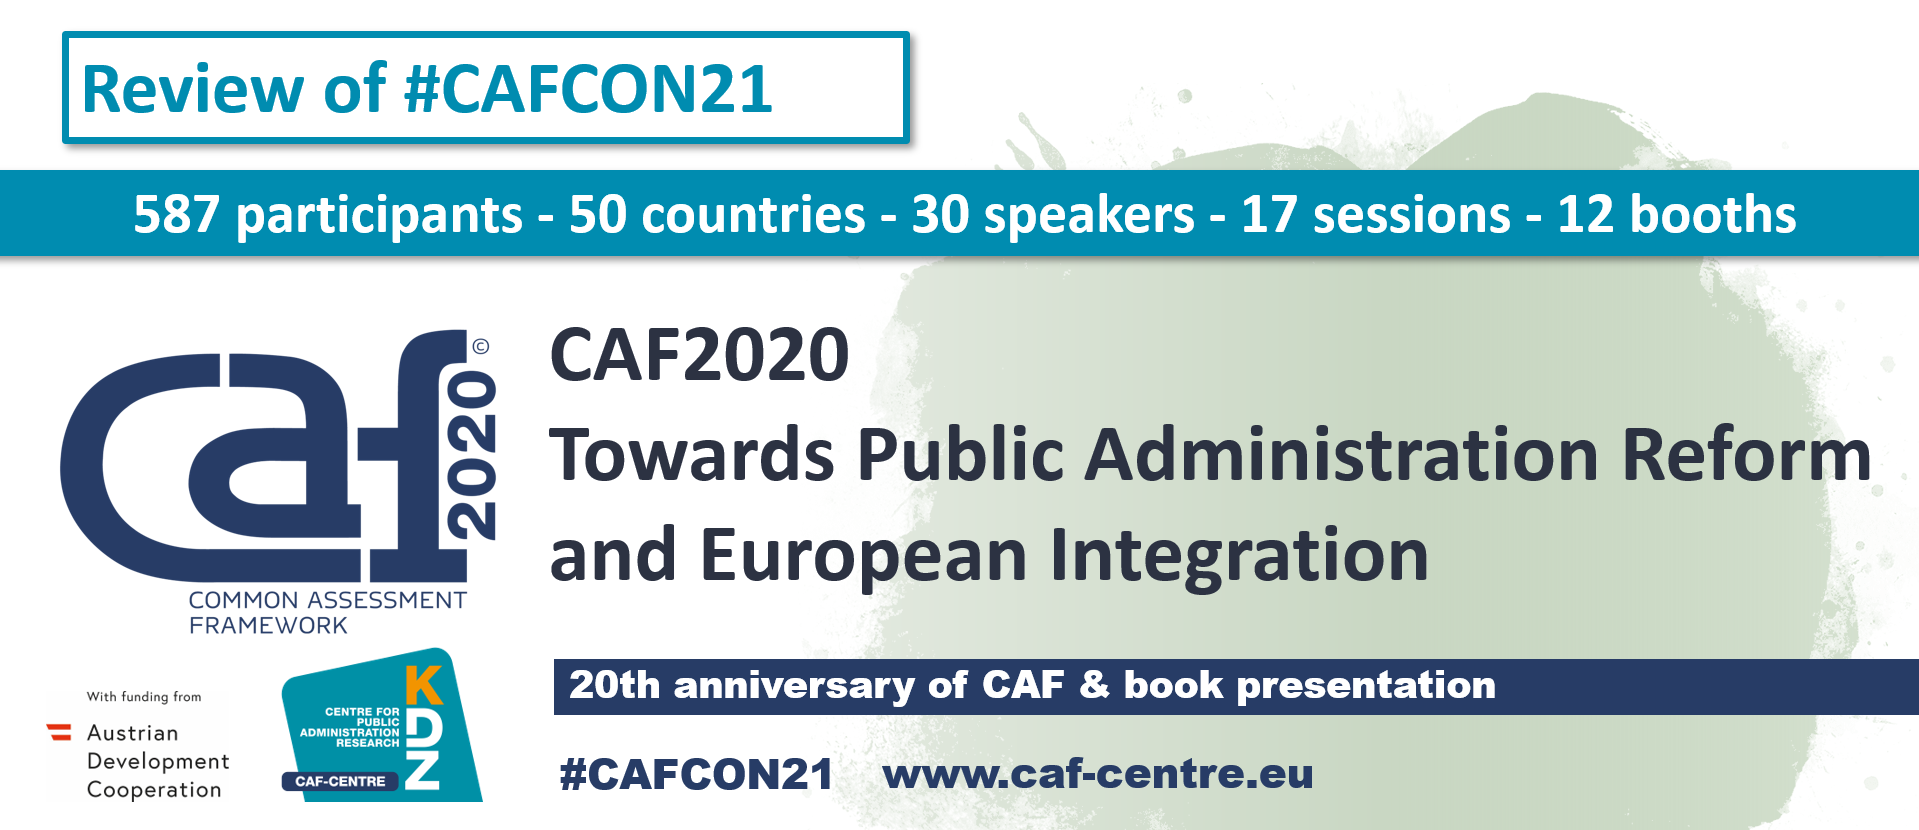 CAFCON21 review